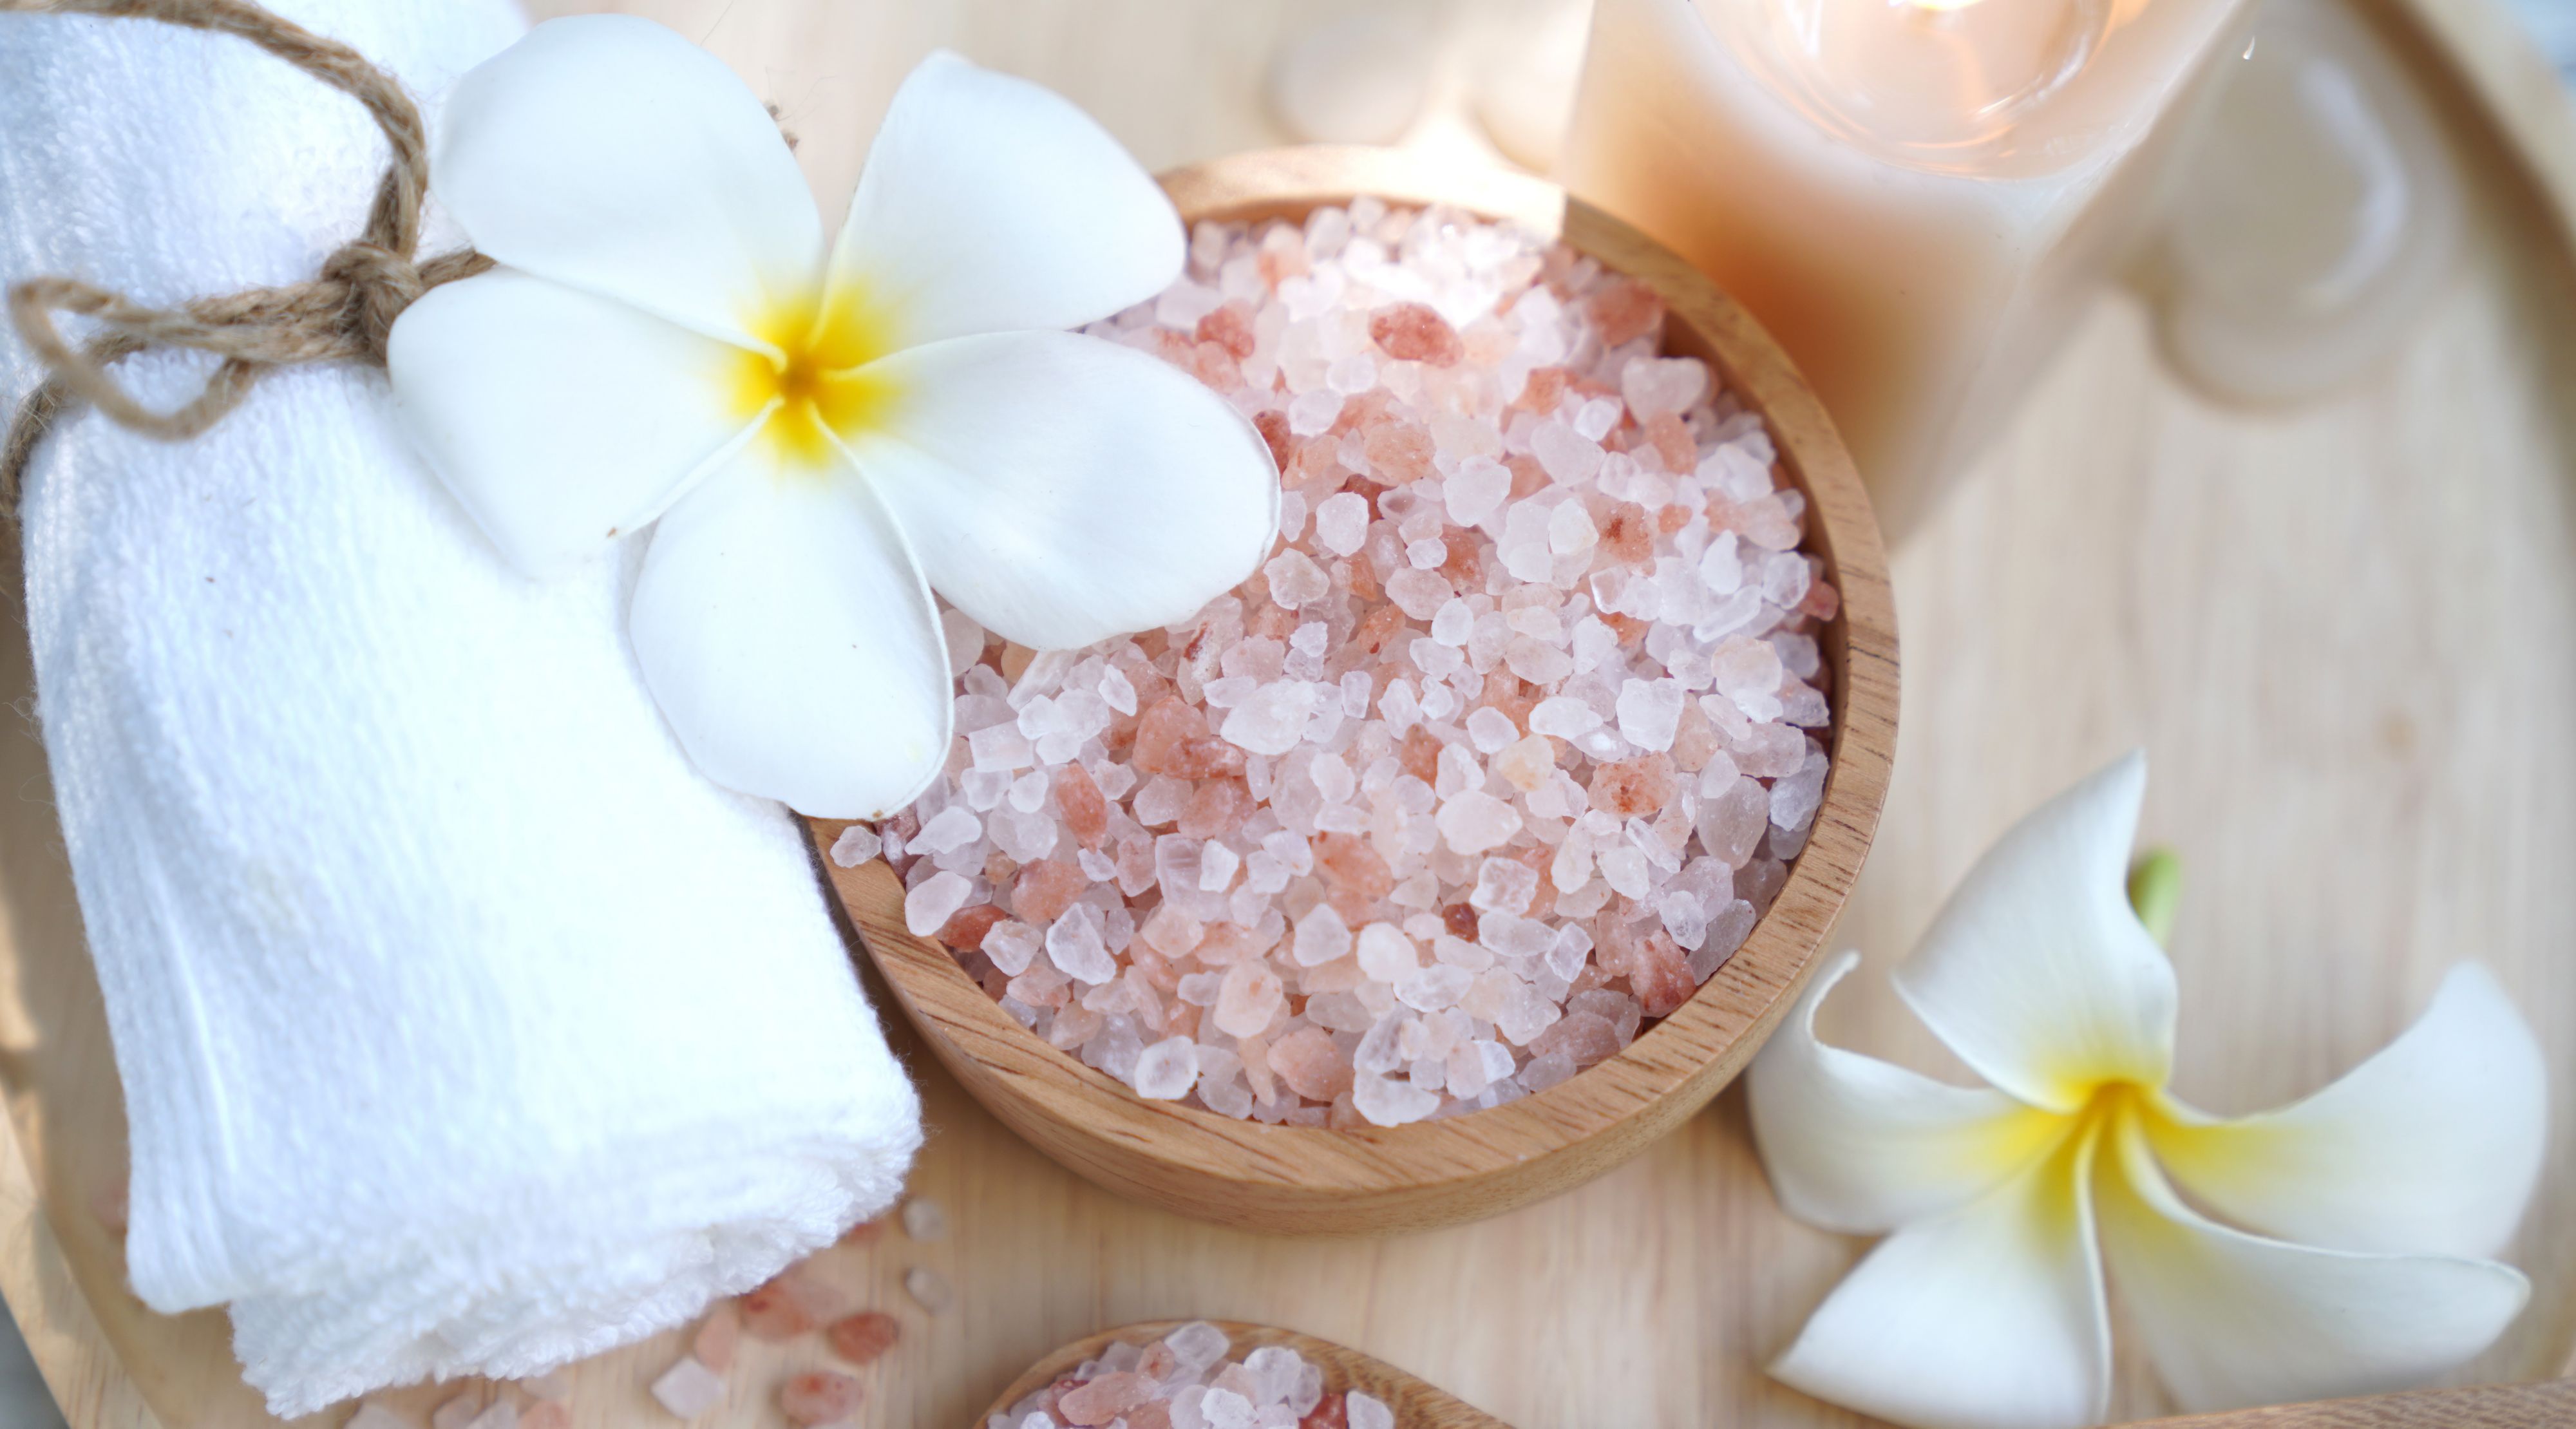 Spa scene with sea salt and orchids